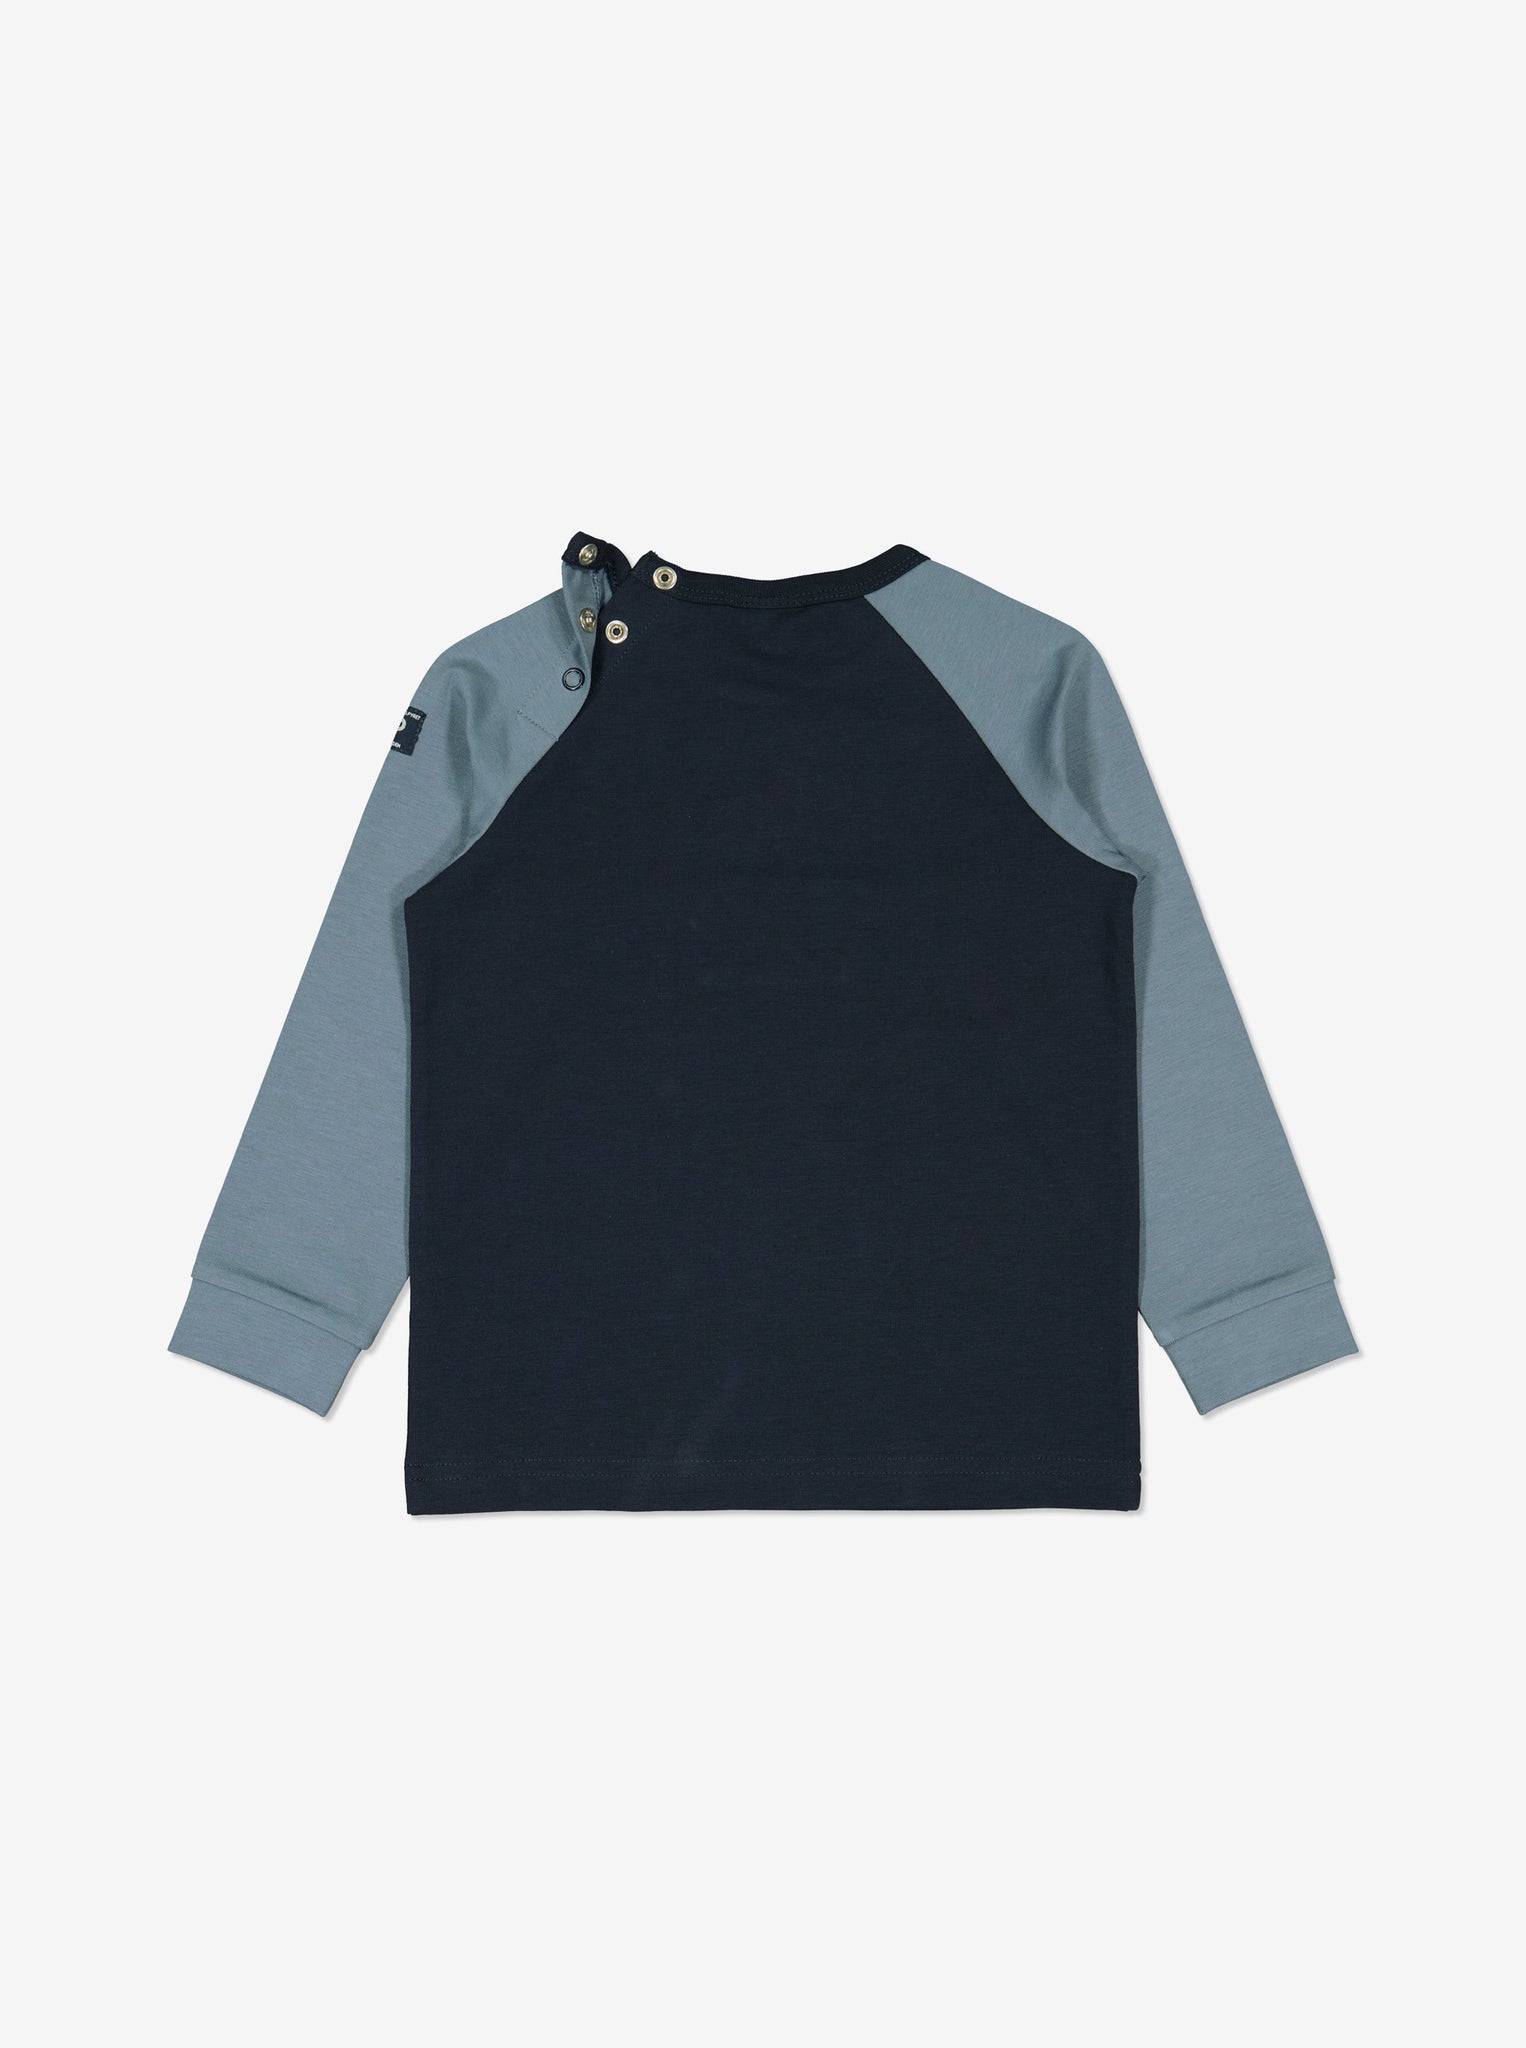  Organic Navy Police Kids Top from Polarn O. Pyret Kidswear. Made from environmentally friendly materials.